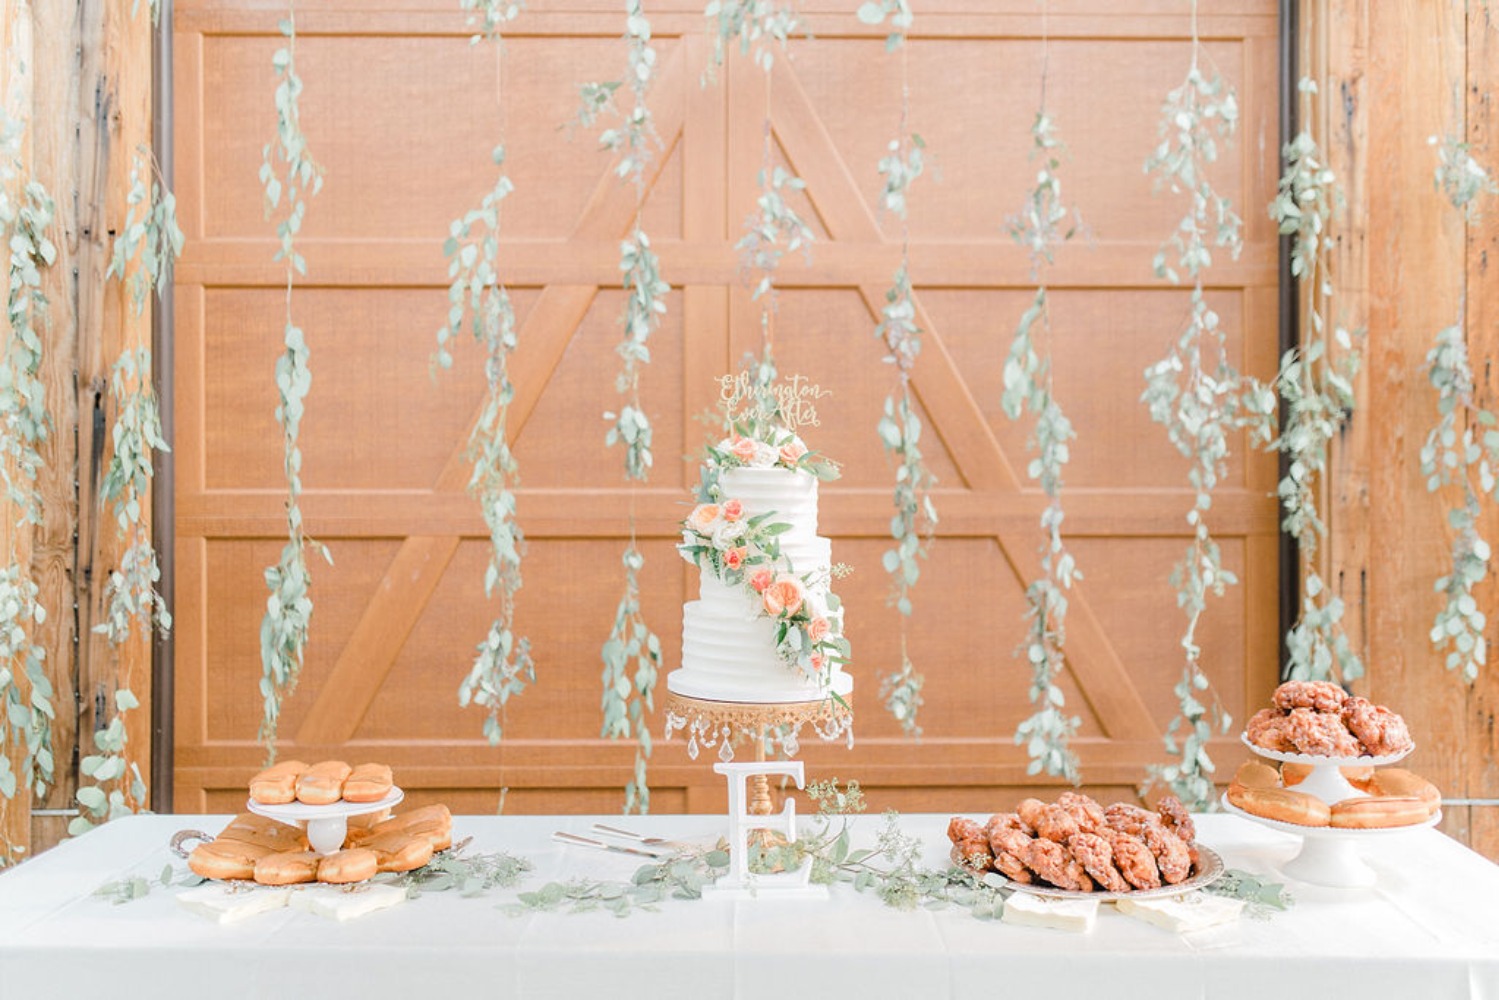 Cake and donut table for a wedding